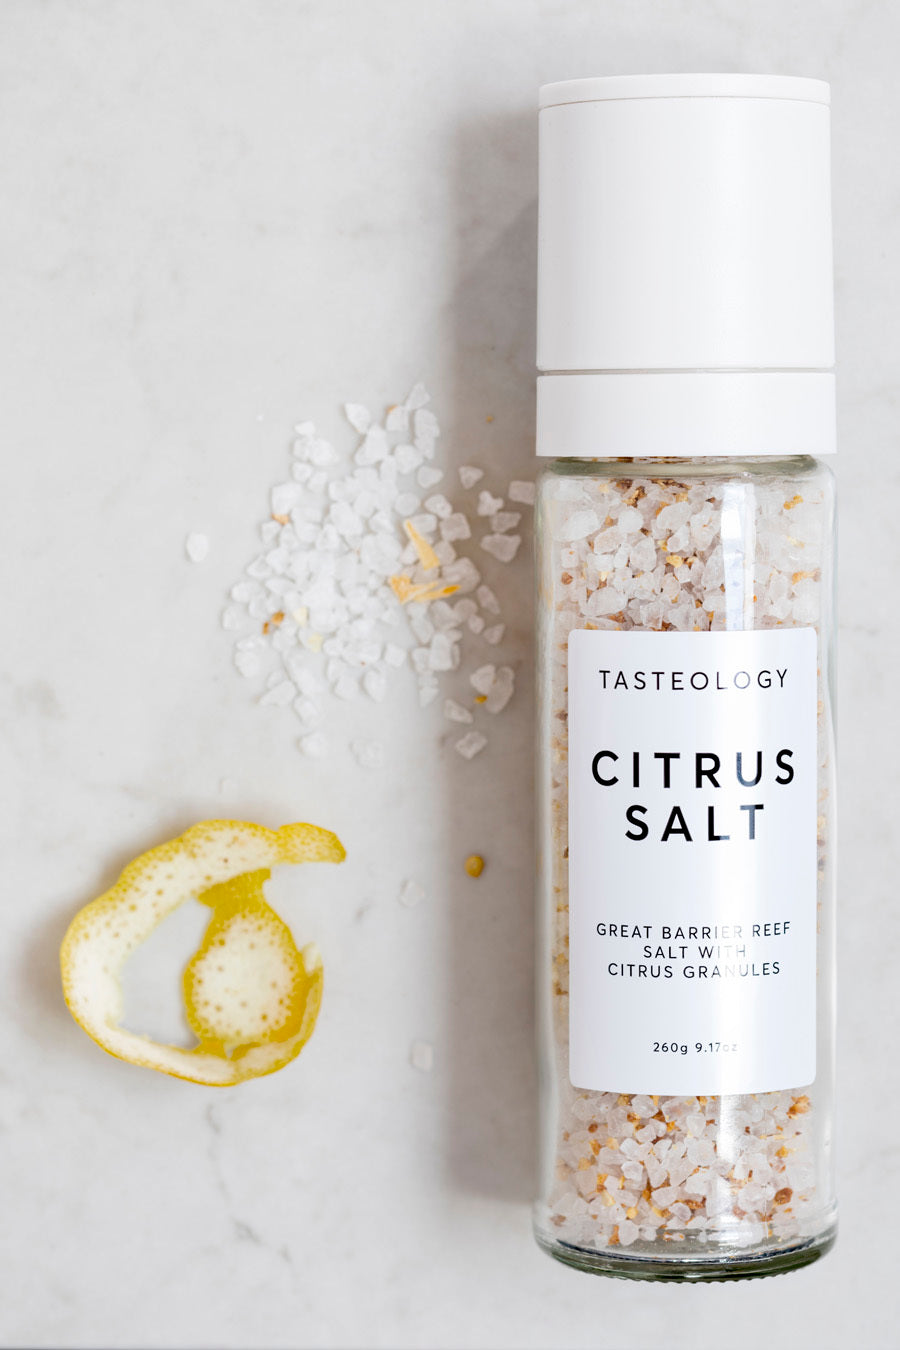 Citrus Salt TASTEOLOGYS Citrus Salt has a base of Great Barrier Reef white rock salt, which has been carefully mixed in with dried lemon granules to create a zesty citrucy flavour.